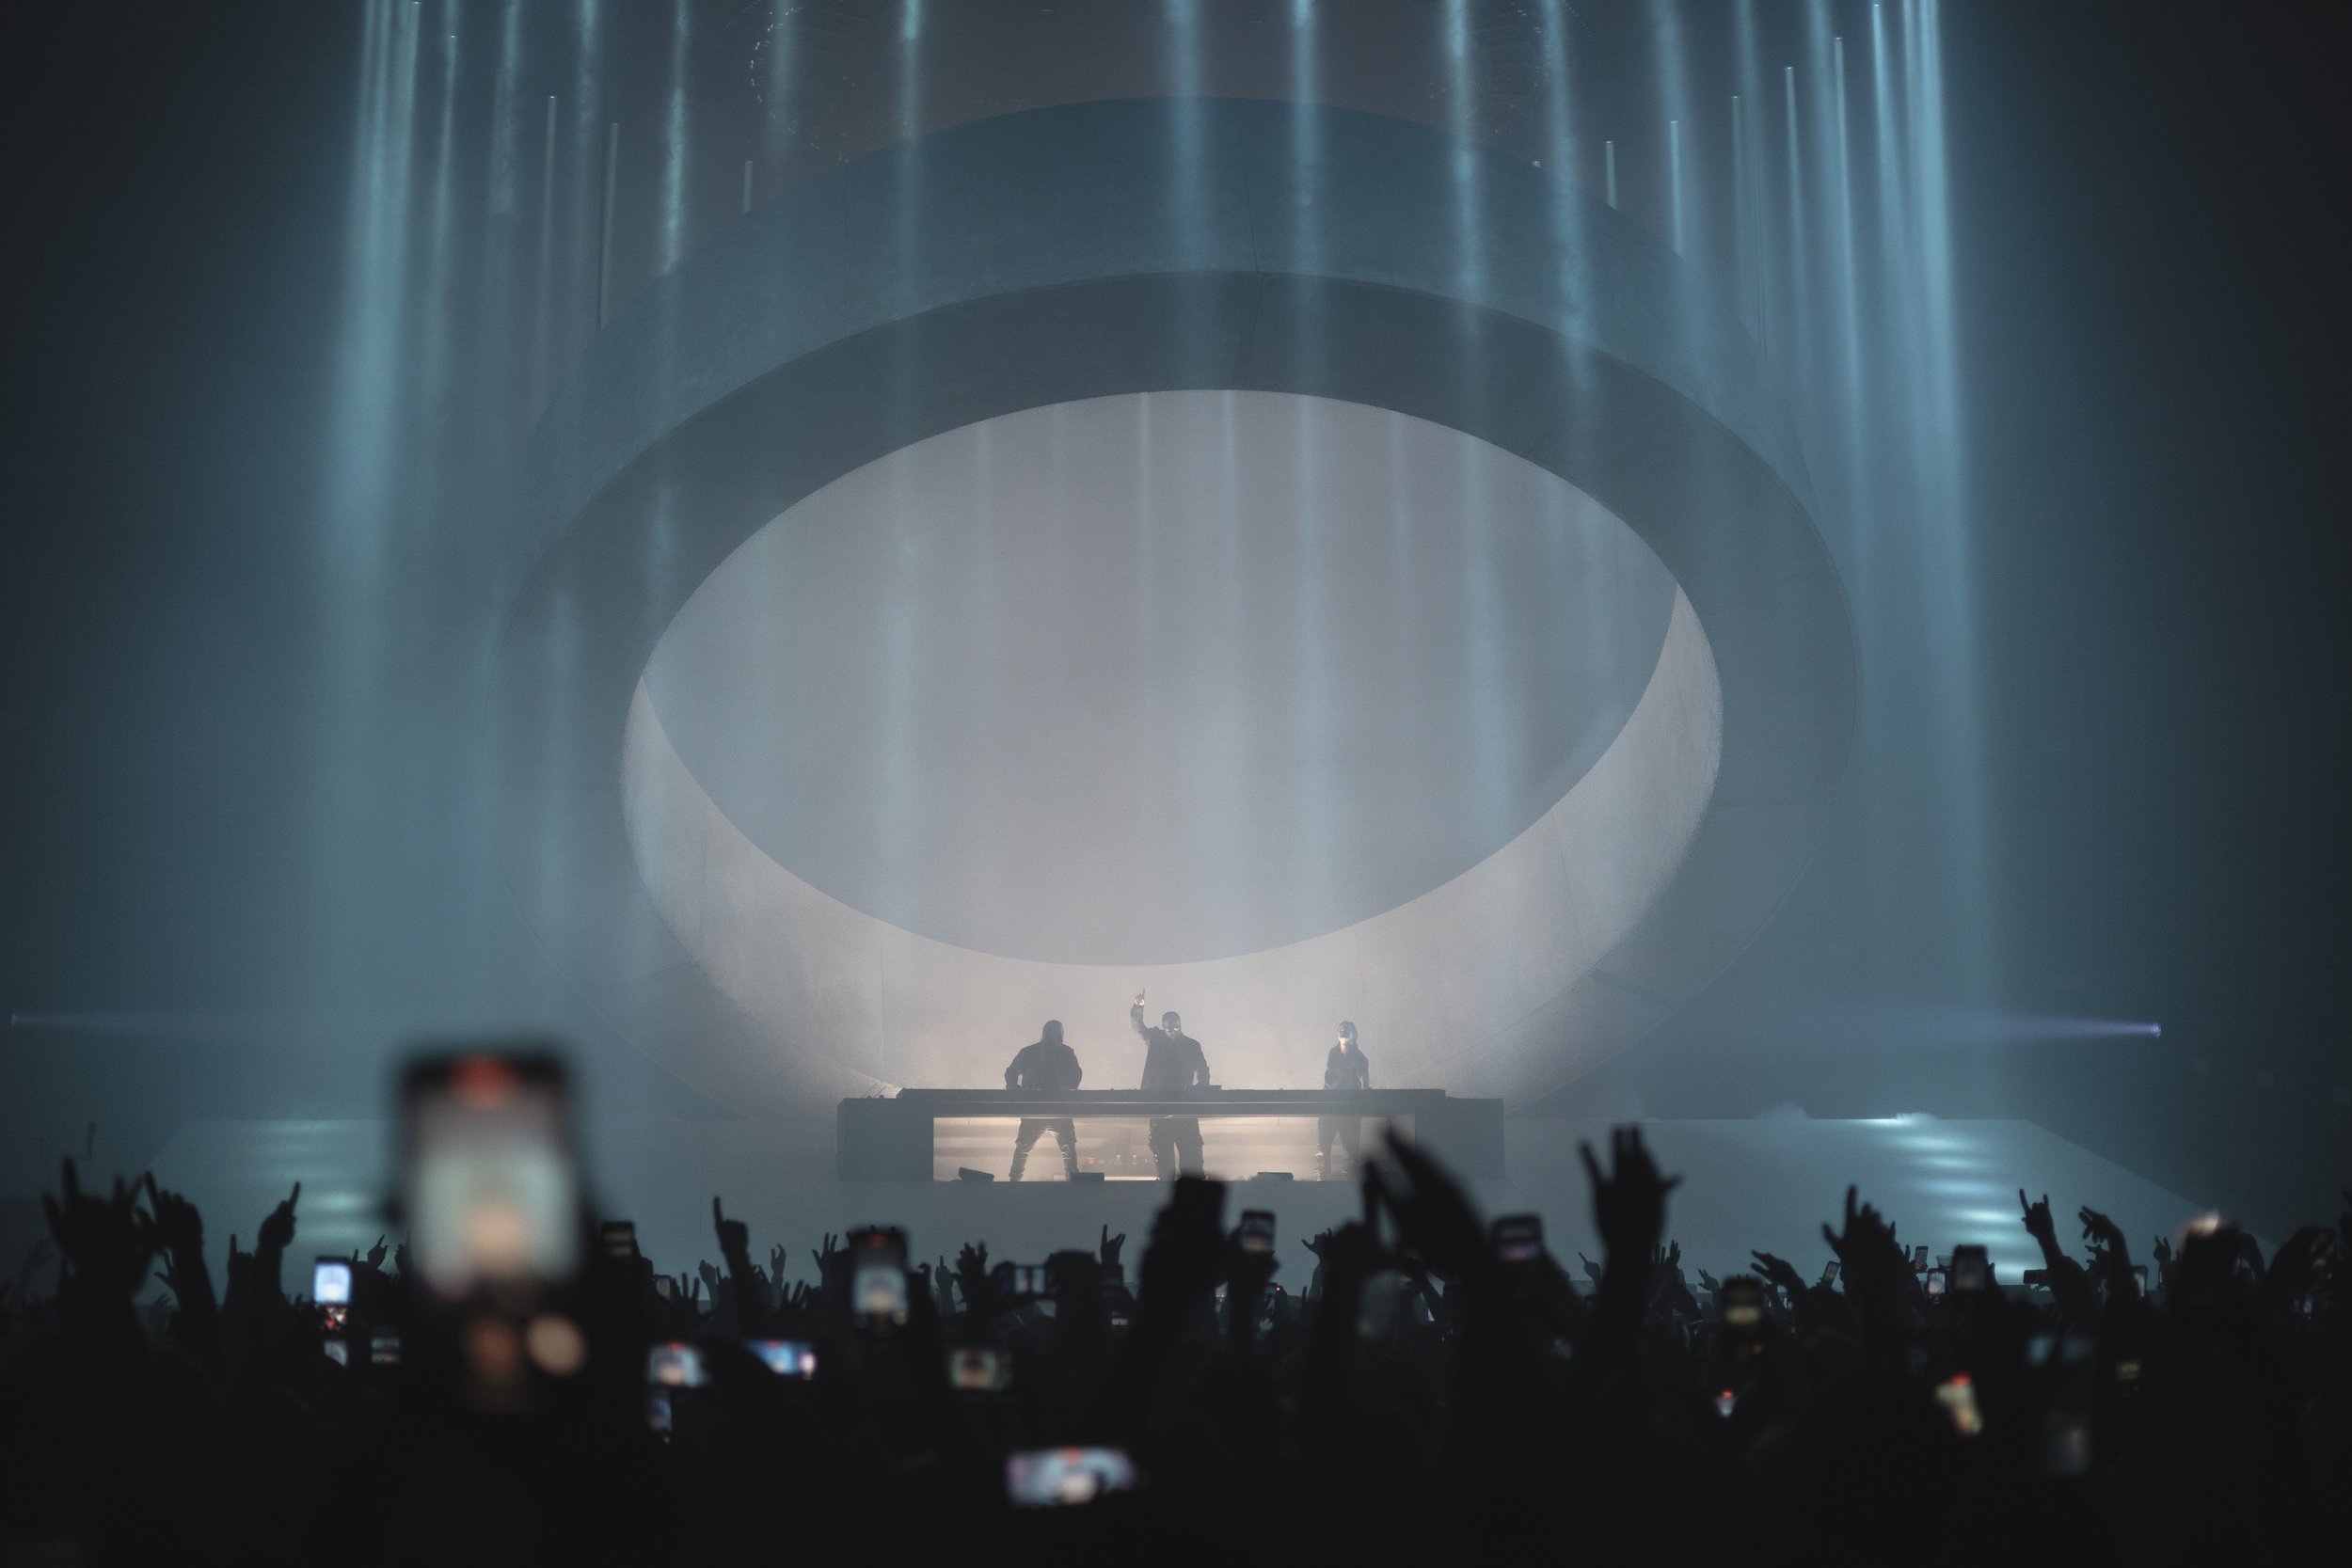  The Swedish House Mafia trio puts on an electric performance for video-ready fans. 